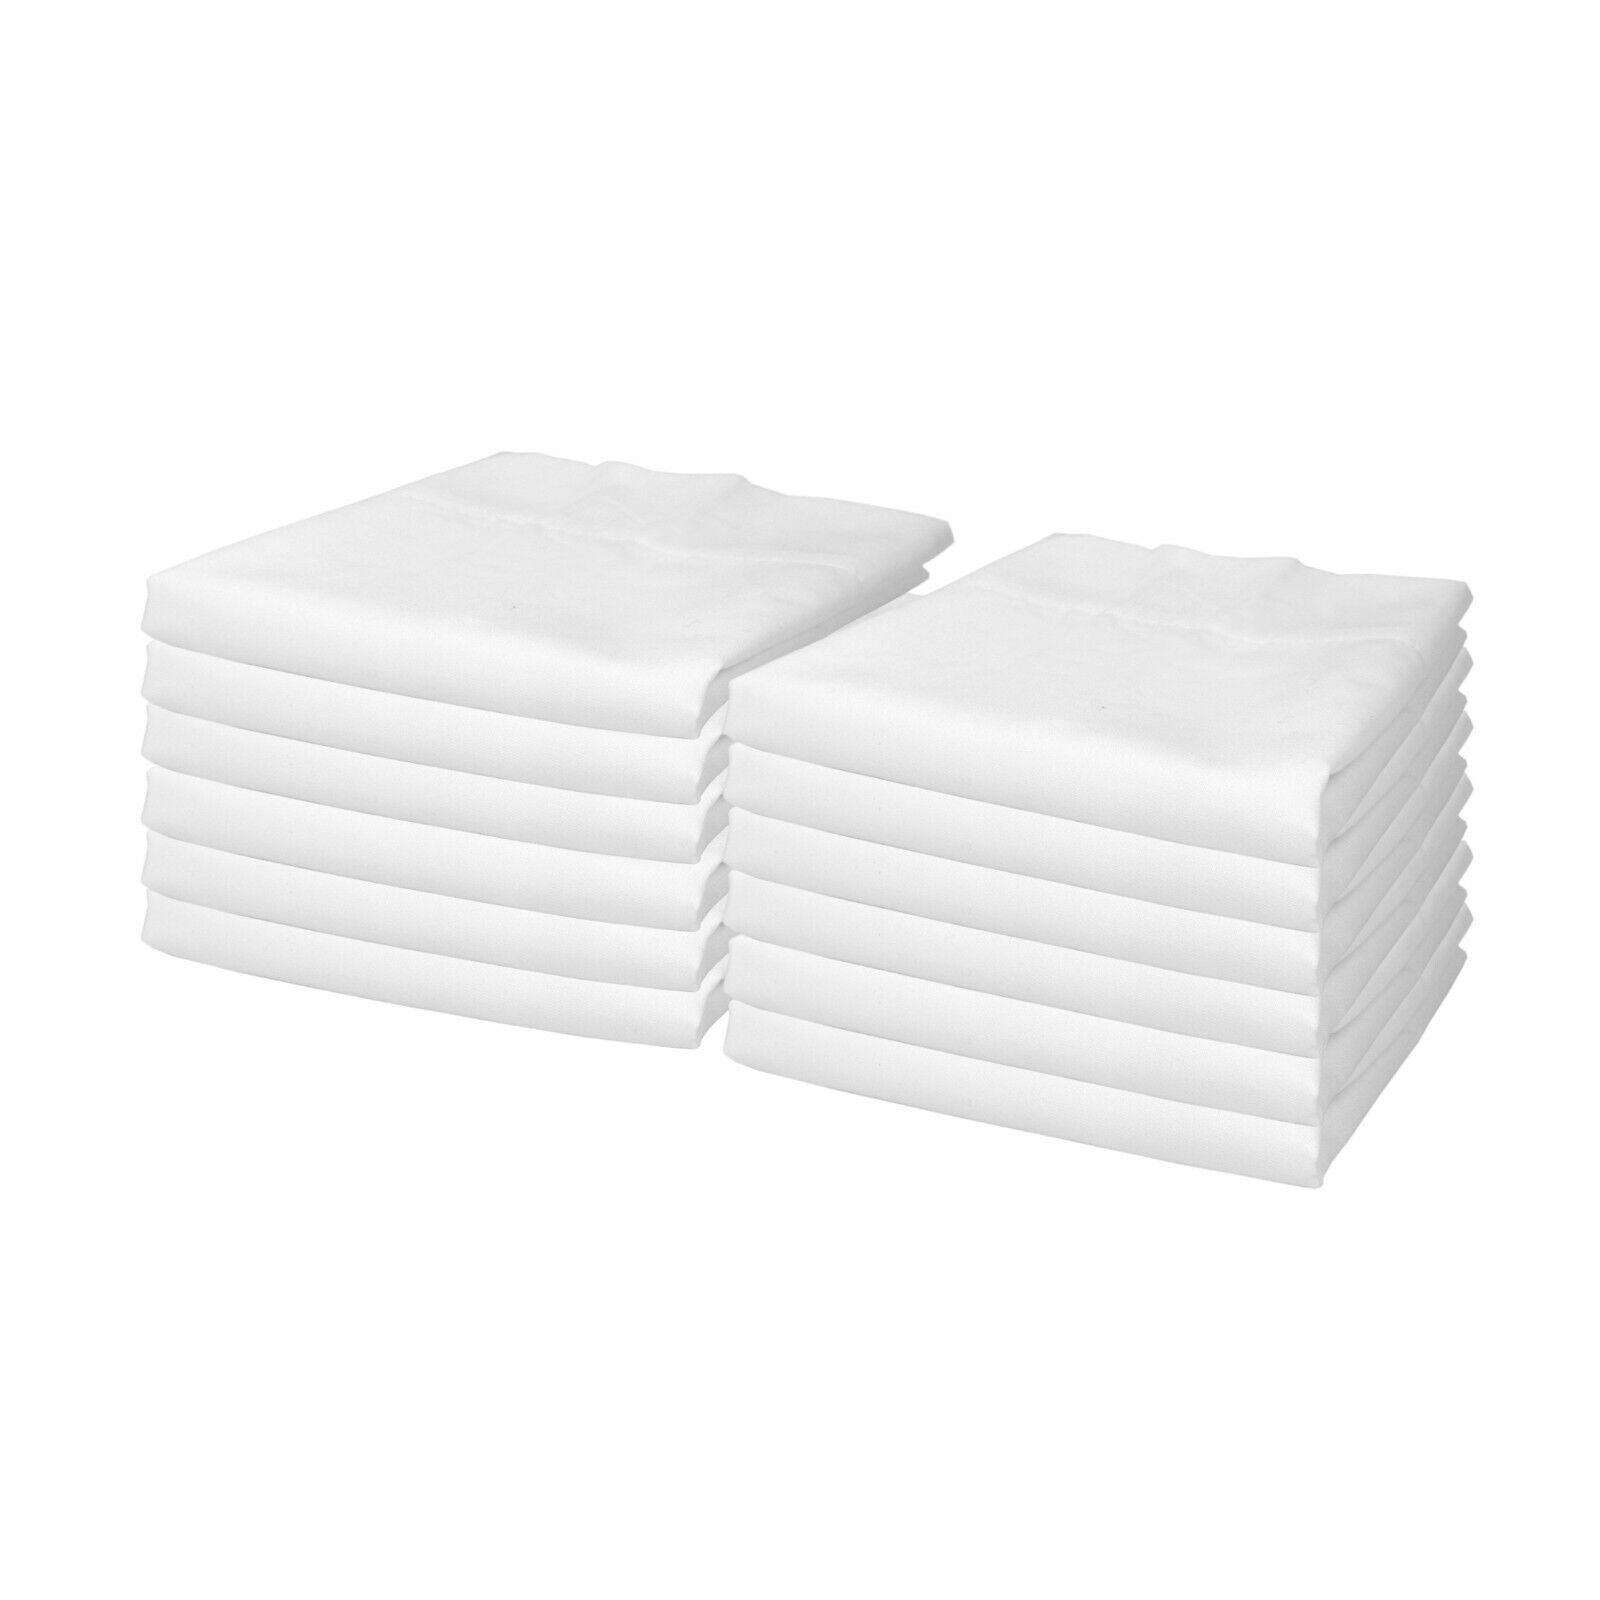 Bulk 12 Pack of Lulworth Pillowcases, 250 Thread Count, White 20x30 Soft Bedding Arkwright Does Not Apply